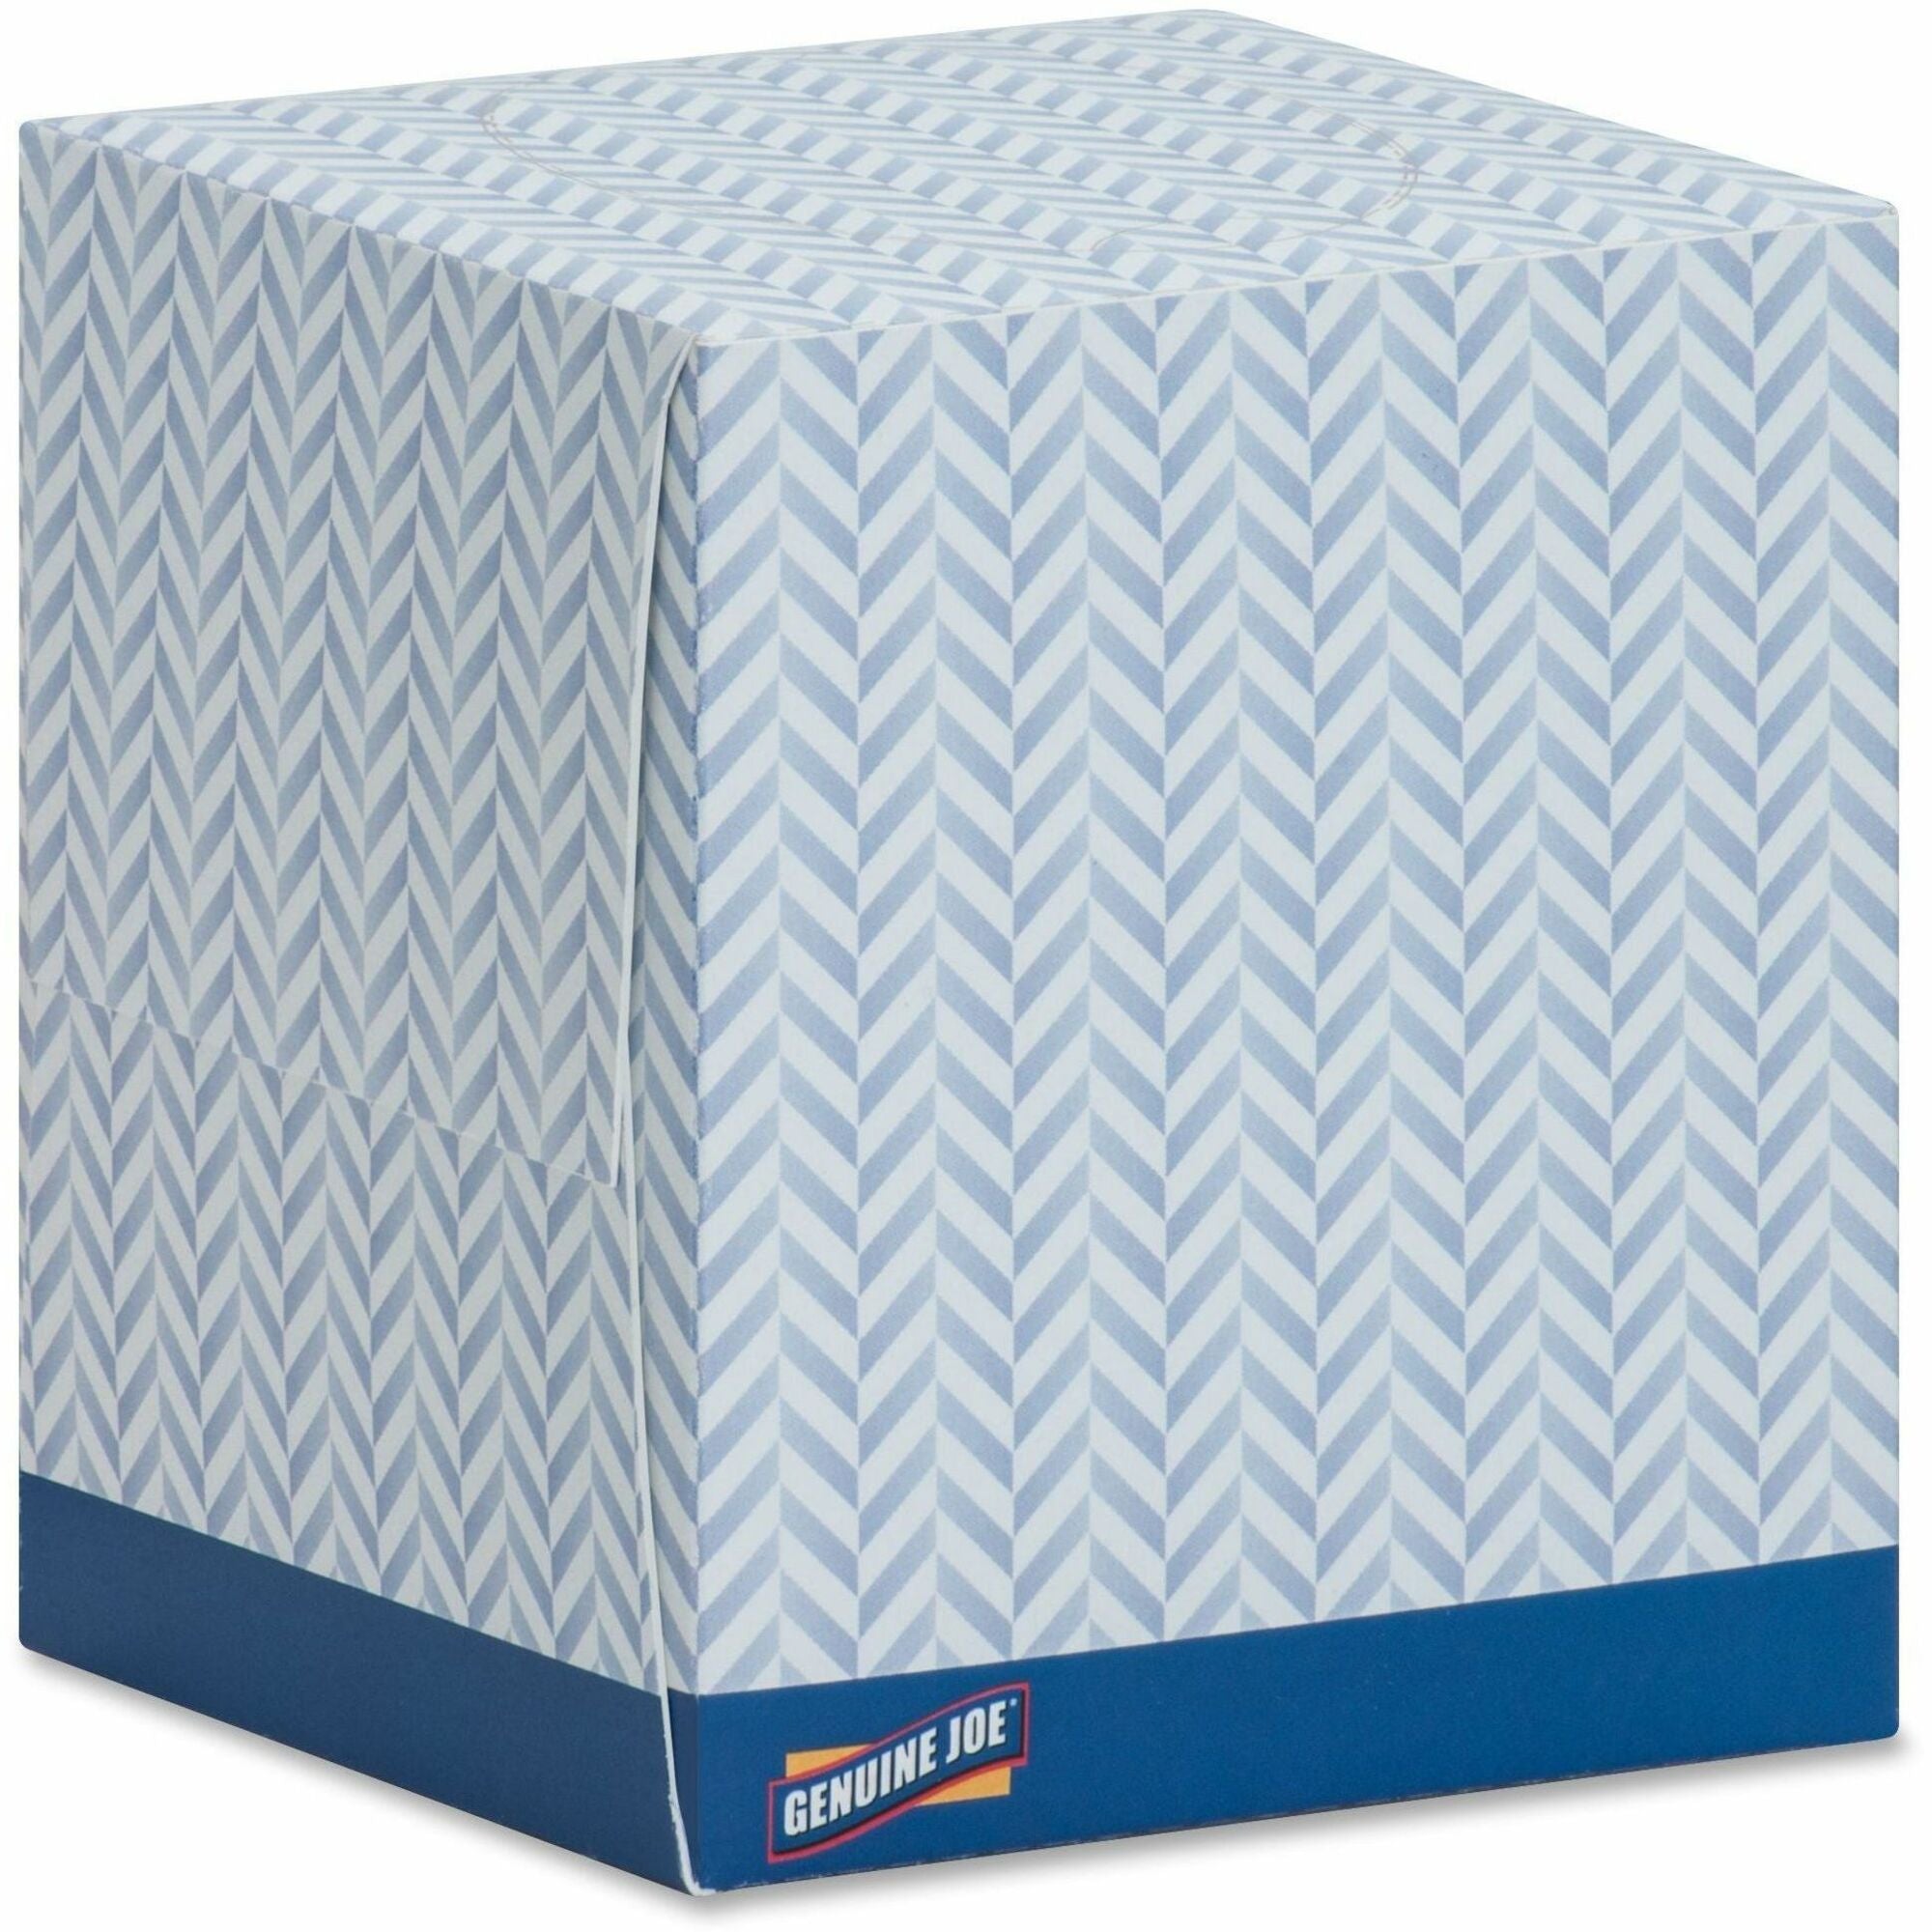 genuine-joe-cube-box-facial-tissue-2-ply-interfolded-white-soft-comfortable-smooth-for-face-skin-home-office-business-85-per-box-36-carton_gjo26085 - 1